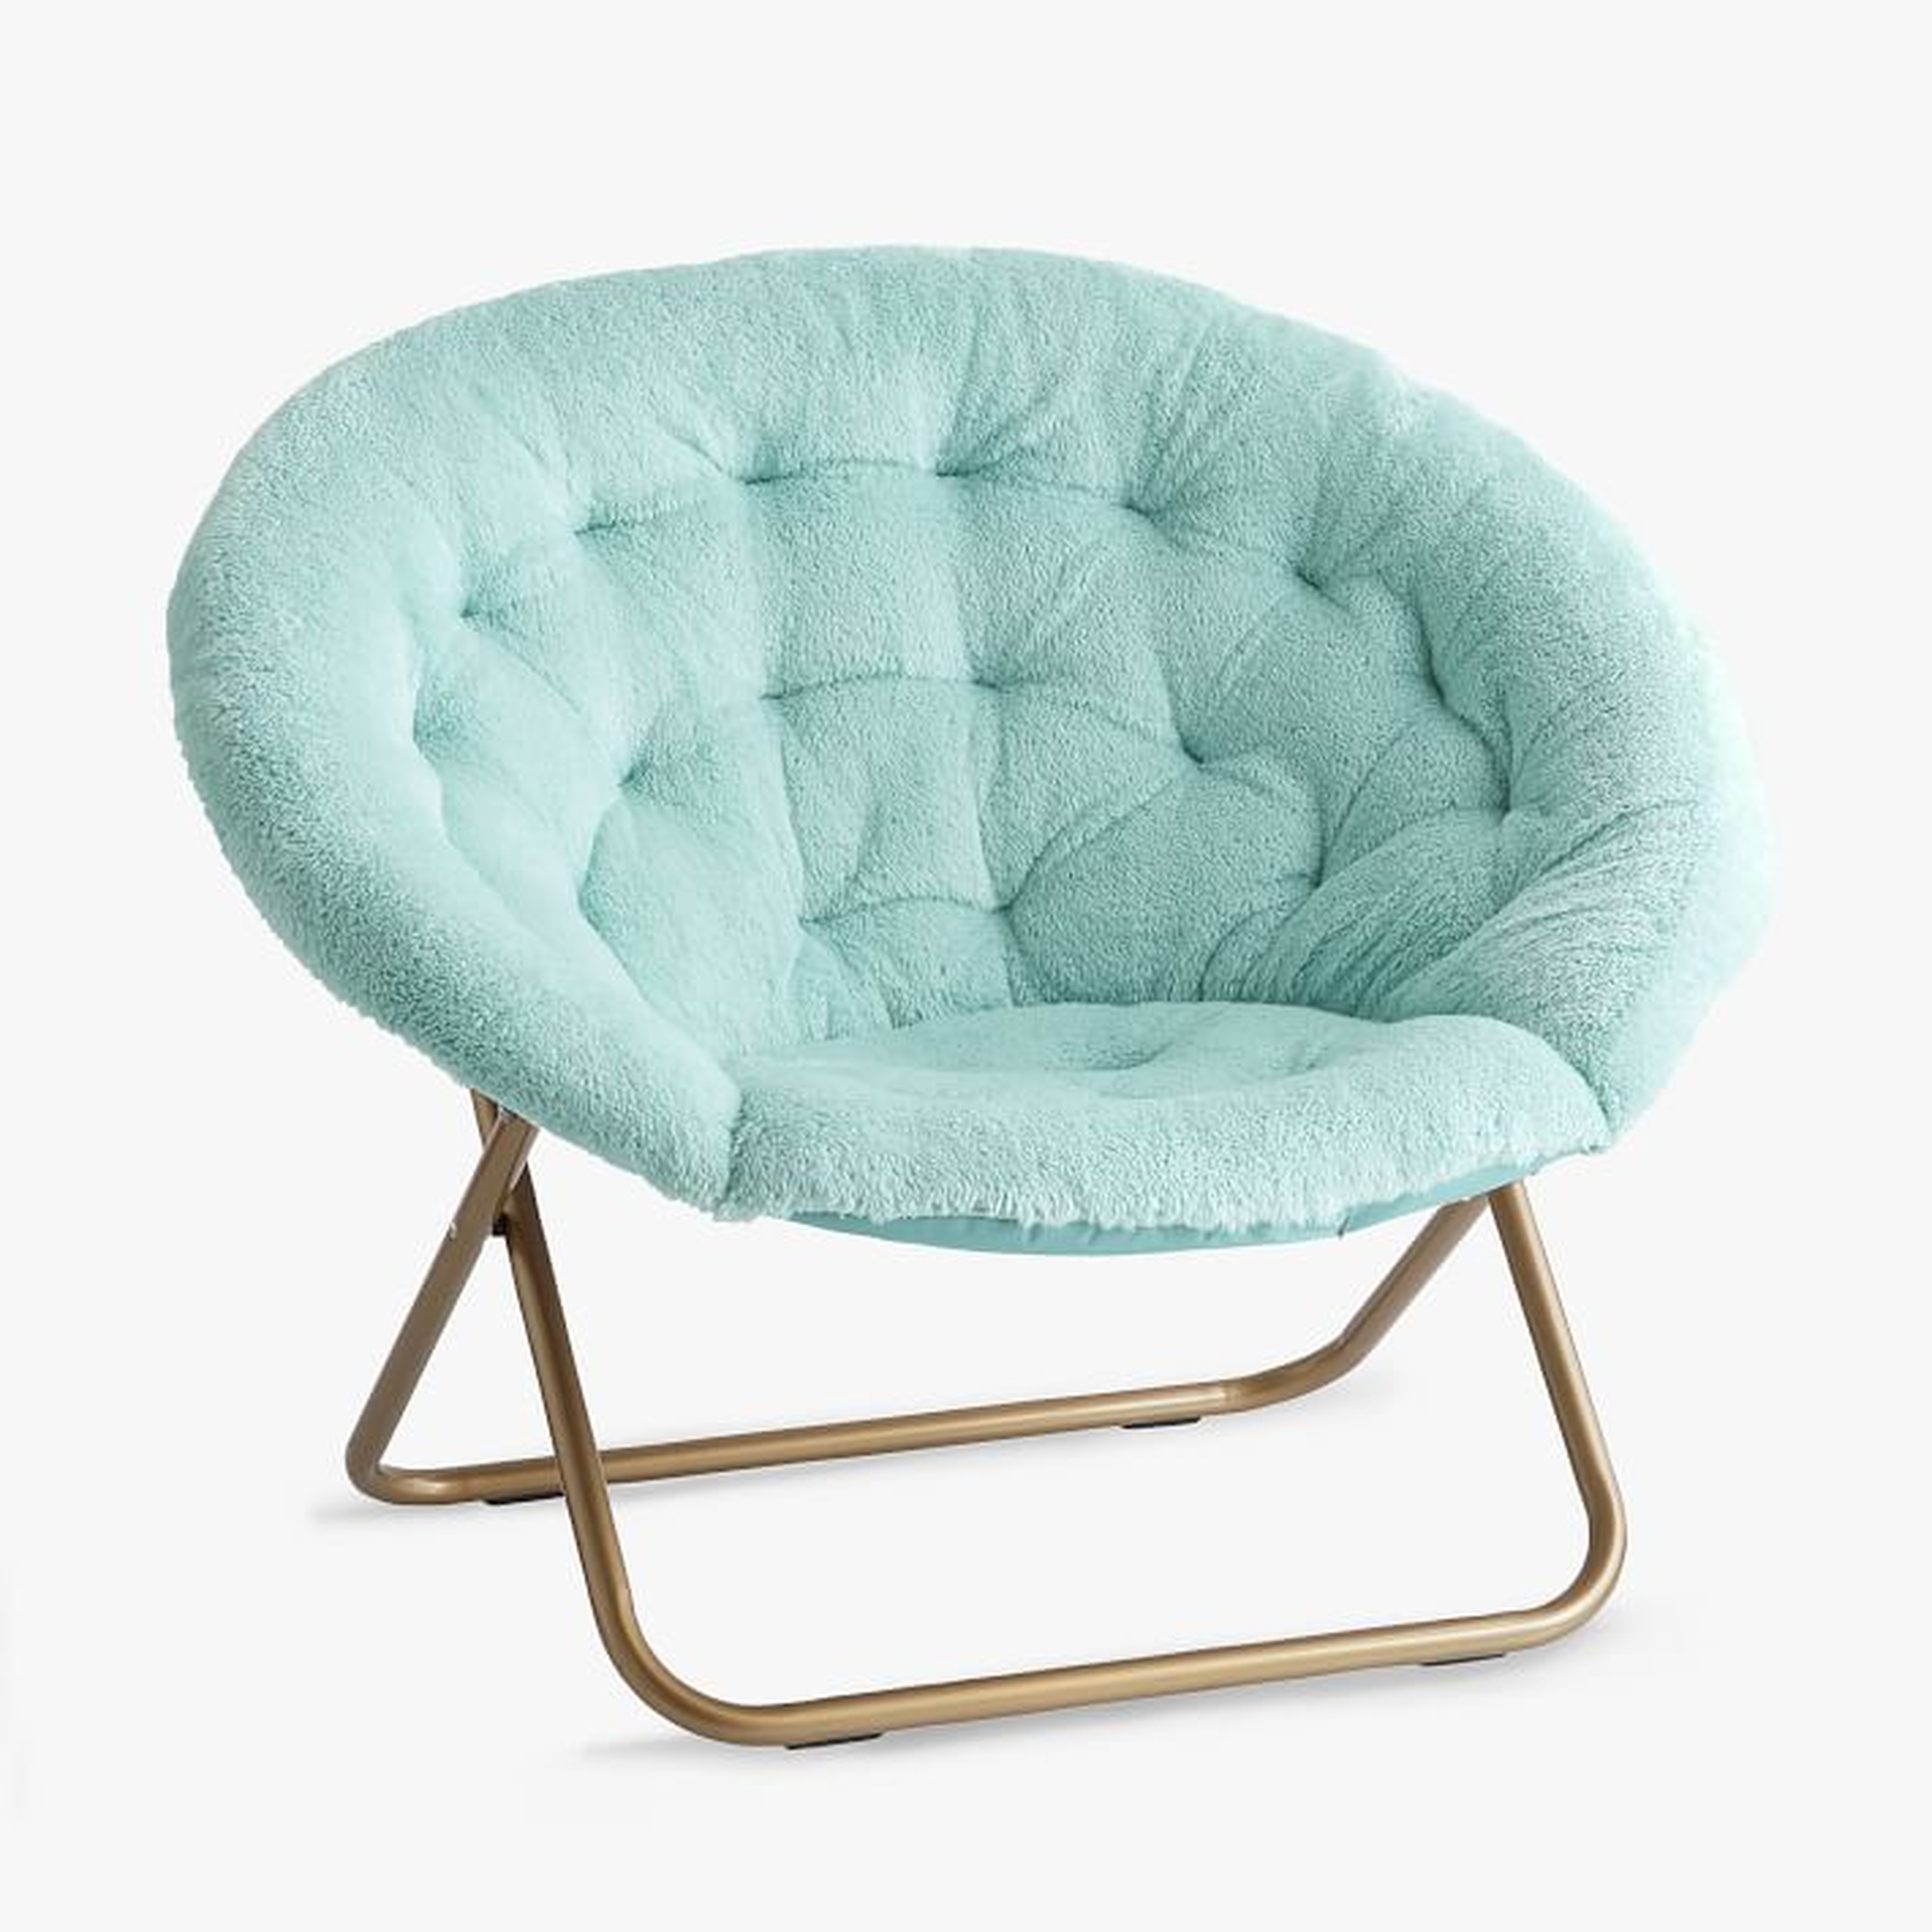 Recycled Cozy Sherpa Hang-A-Round Chair, Turquoise - Pottery Barn Teen